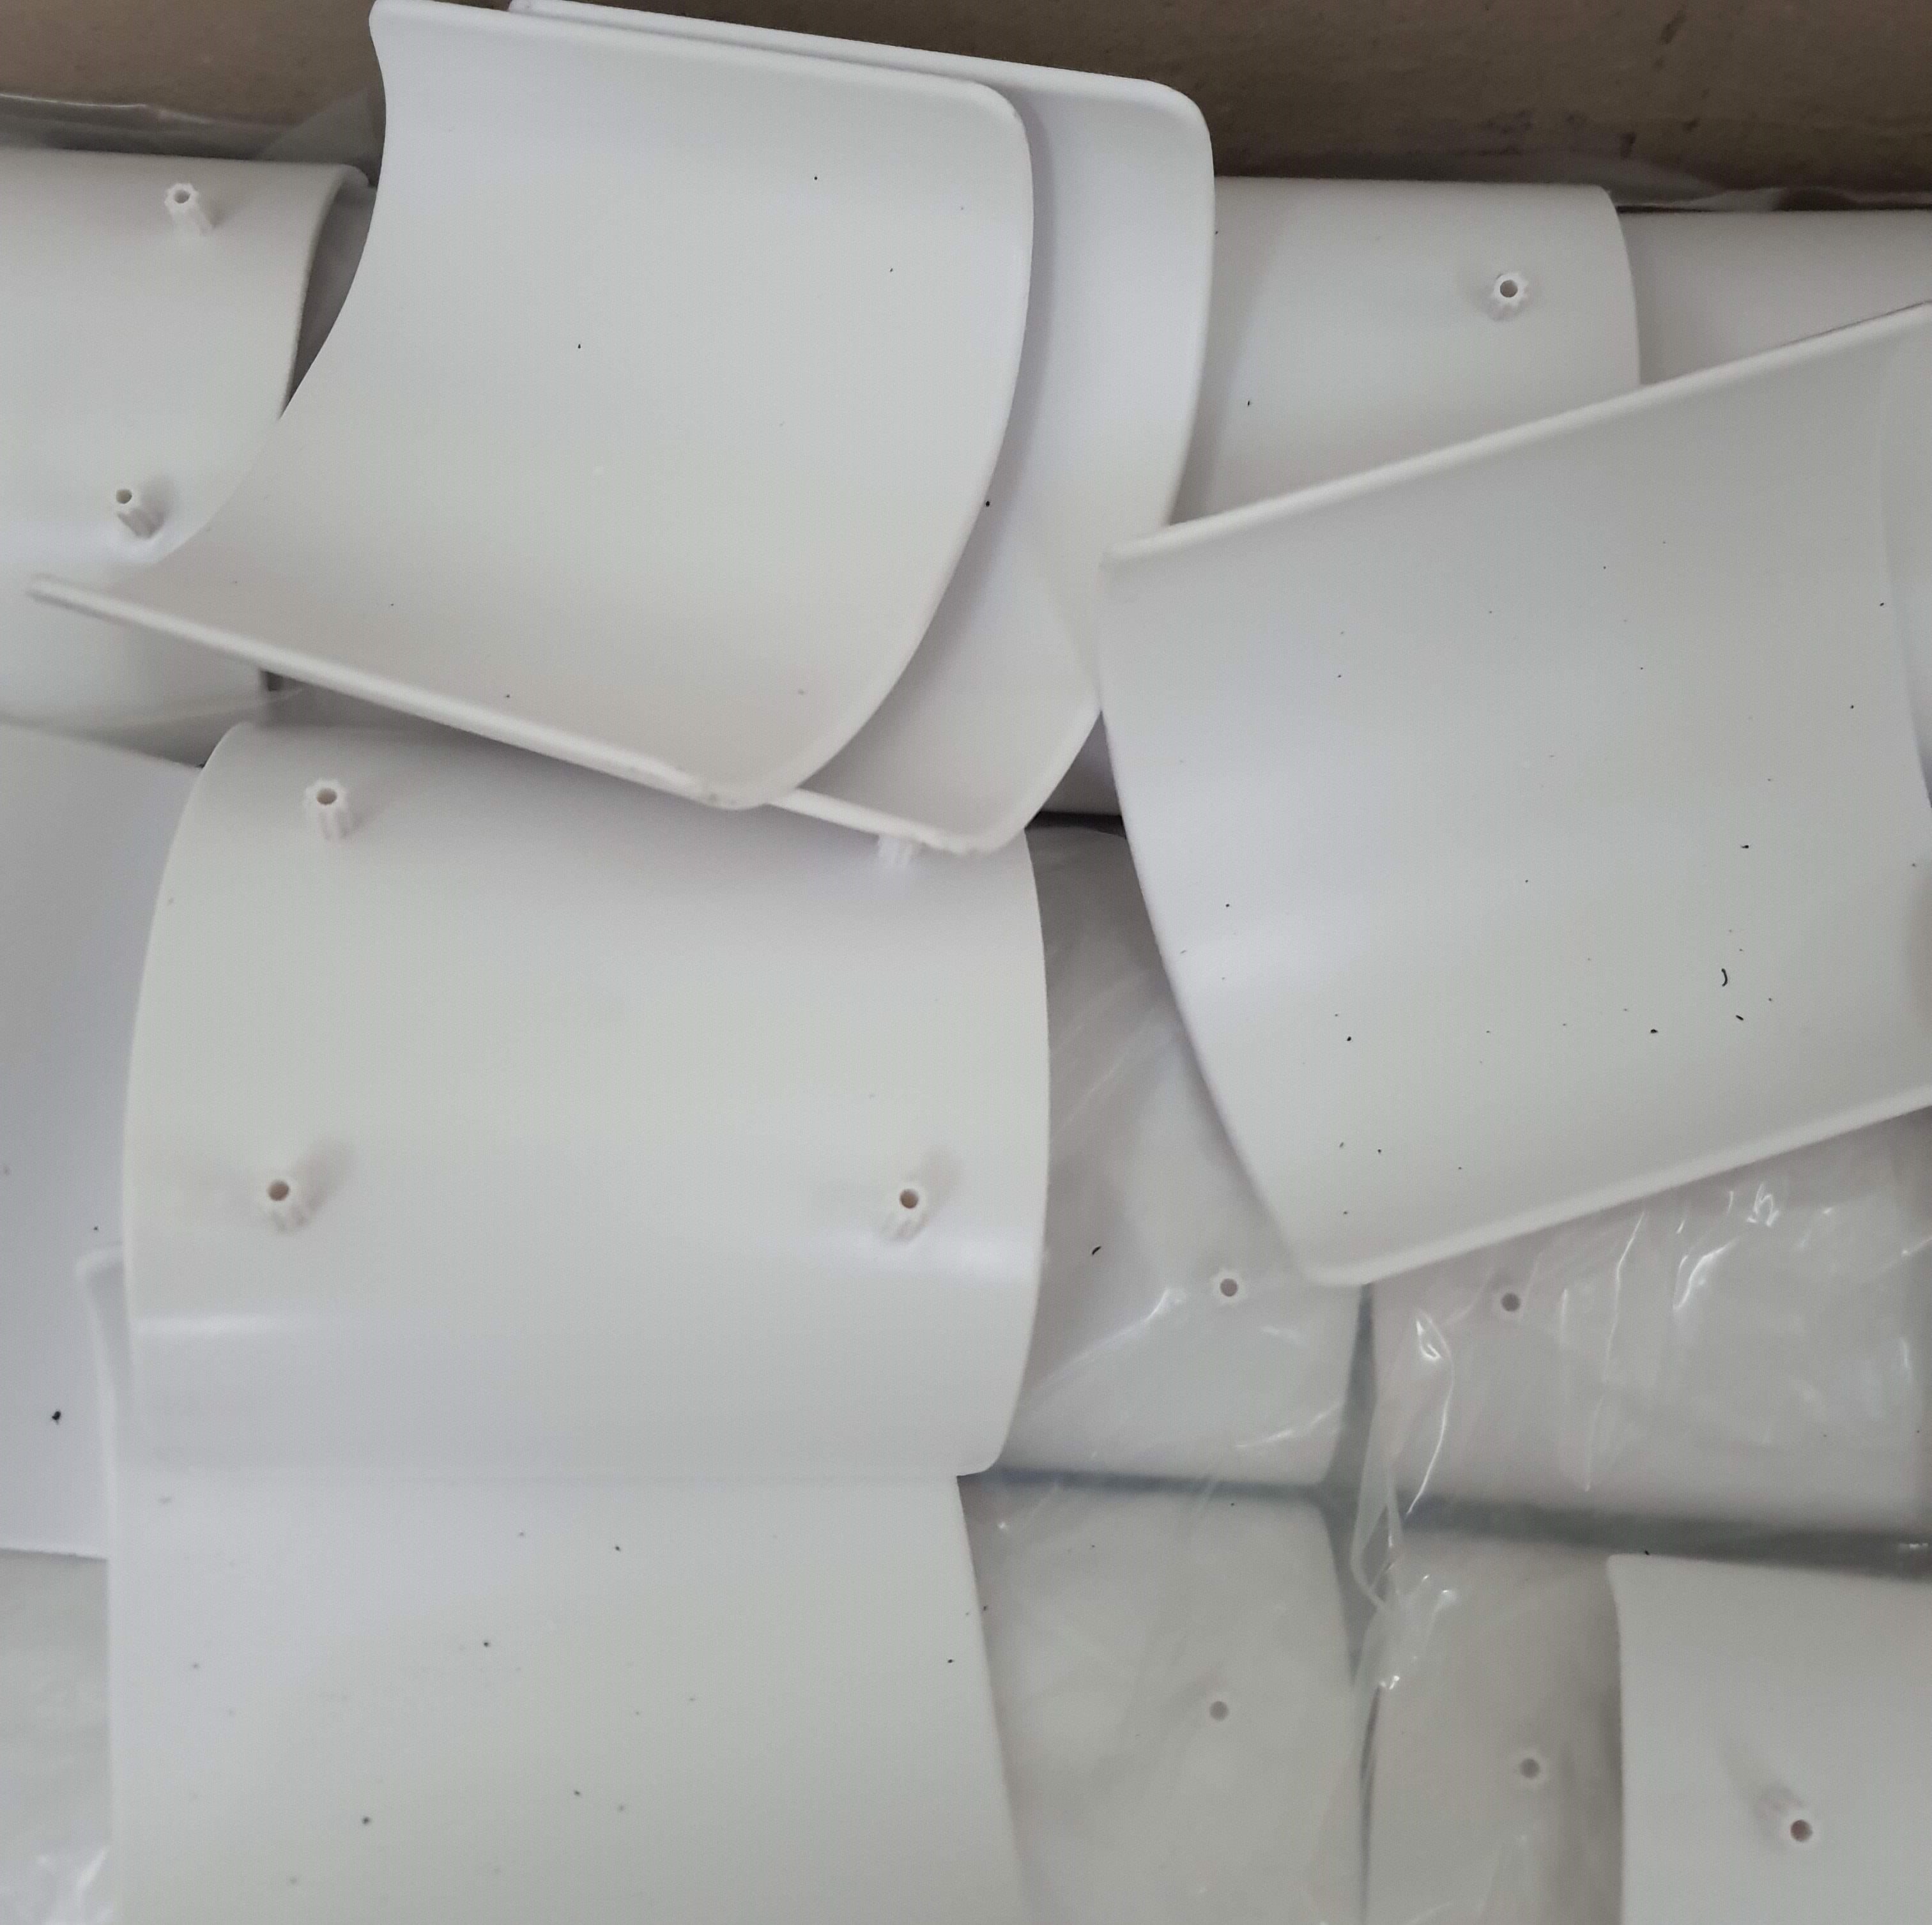 Plastic Product Customization High Quality Cost-effectiveness Packaging Industry Customized Size Production Efficiency Vietnam